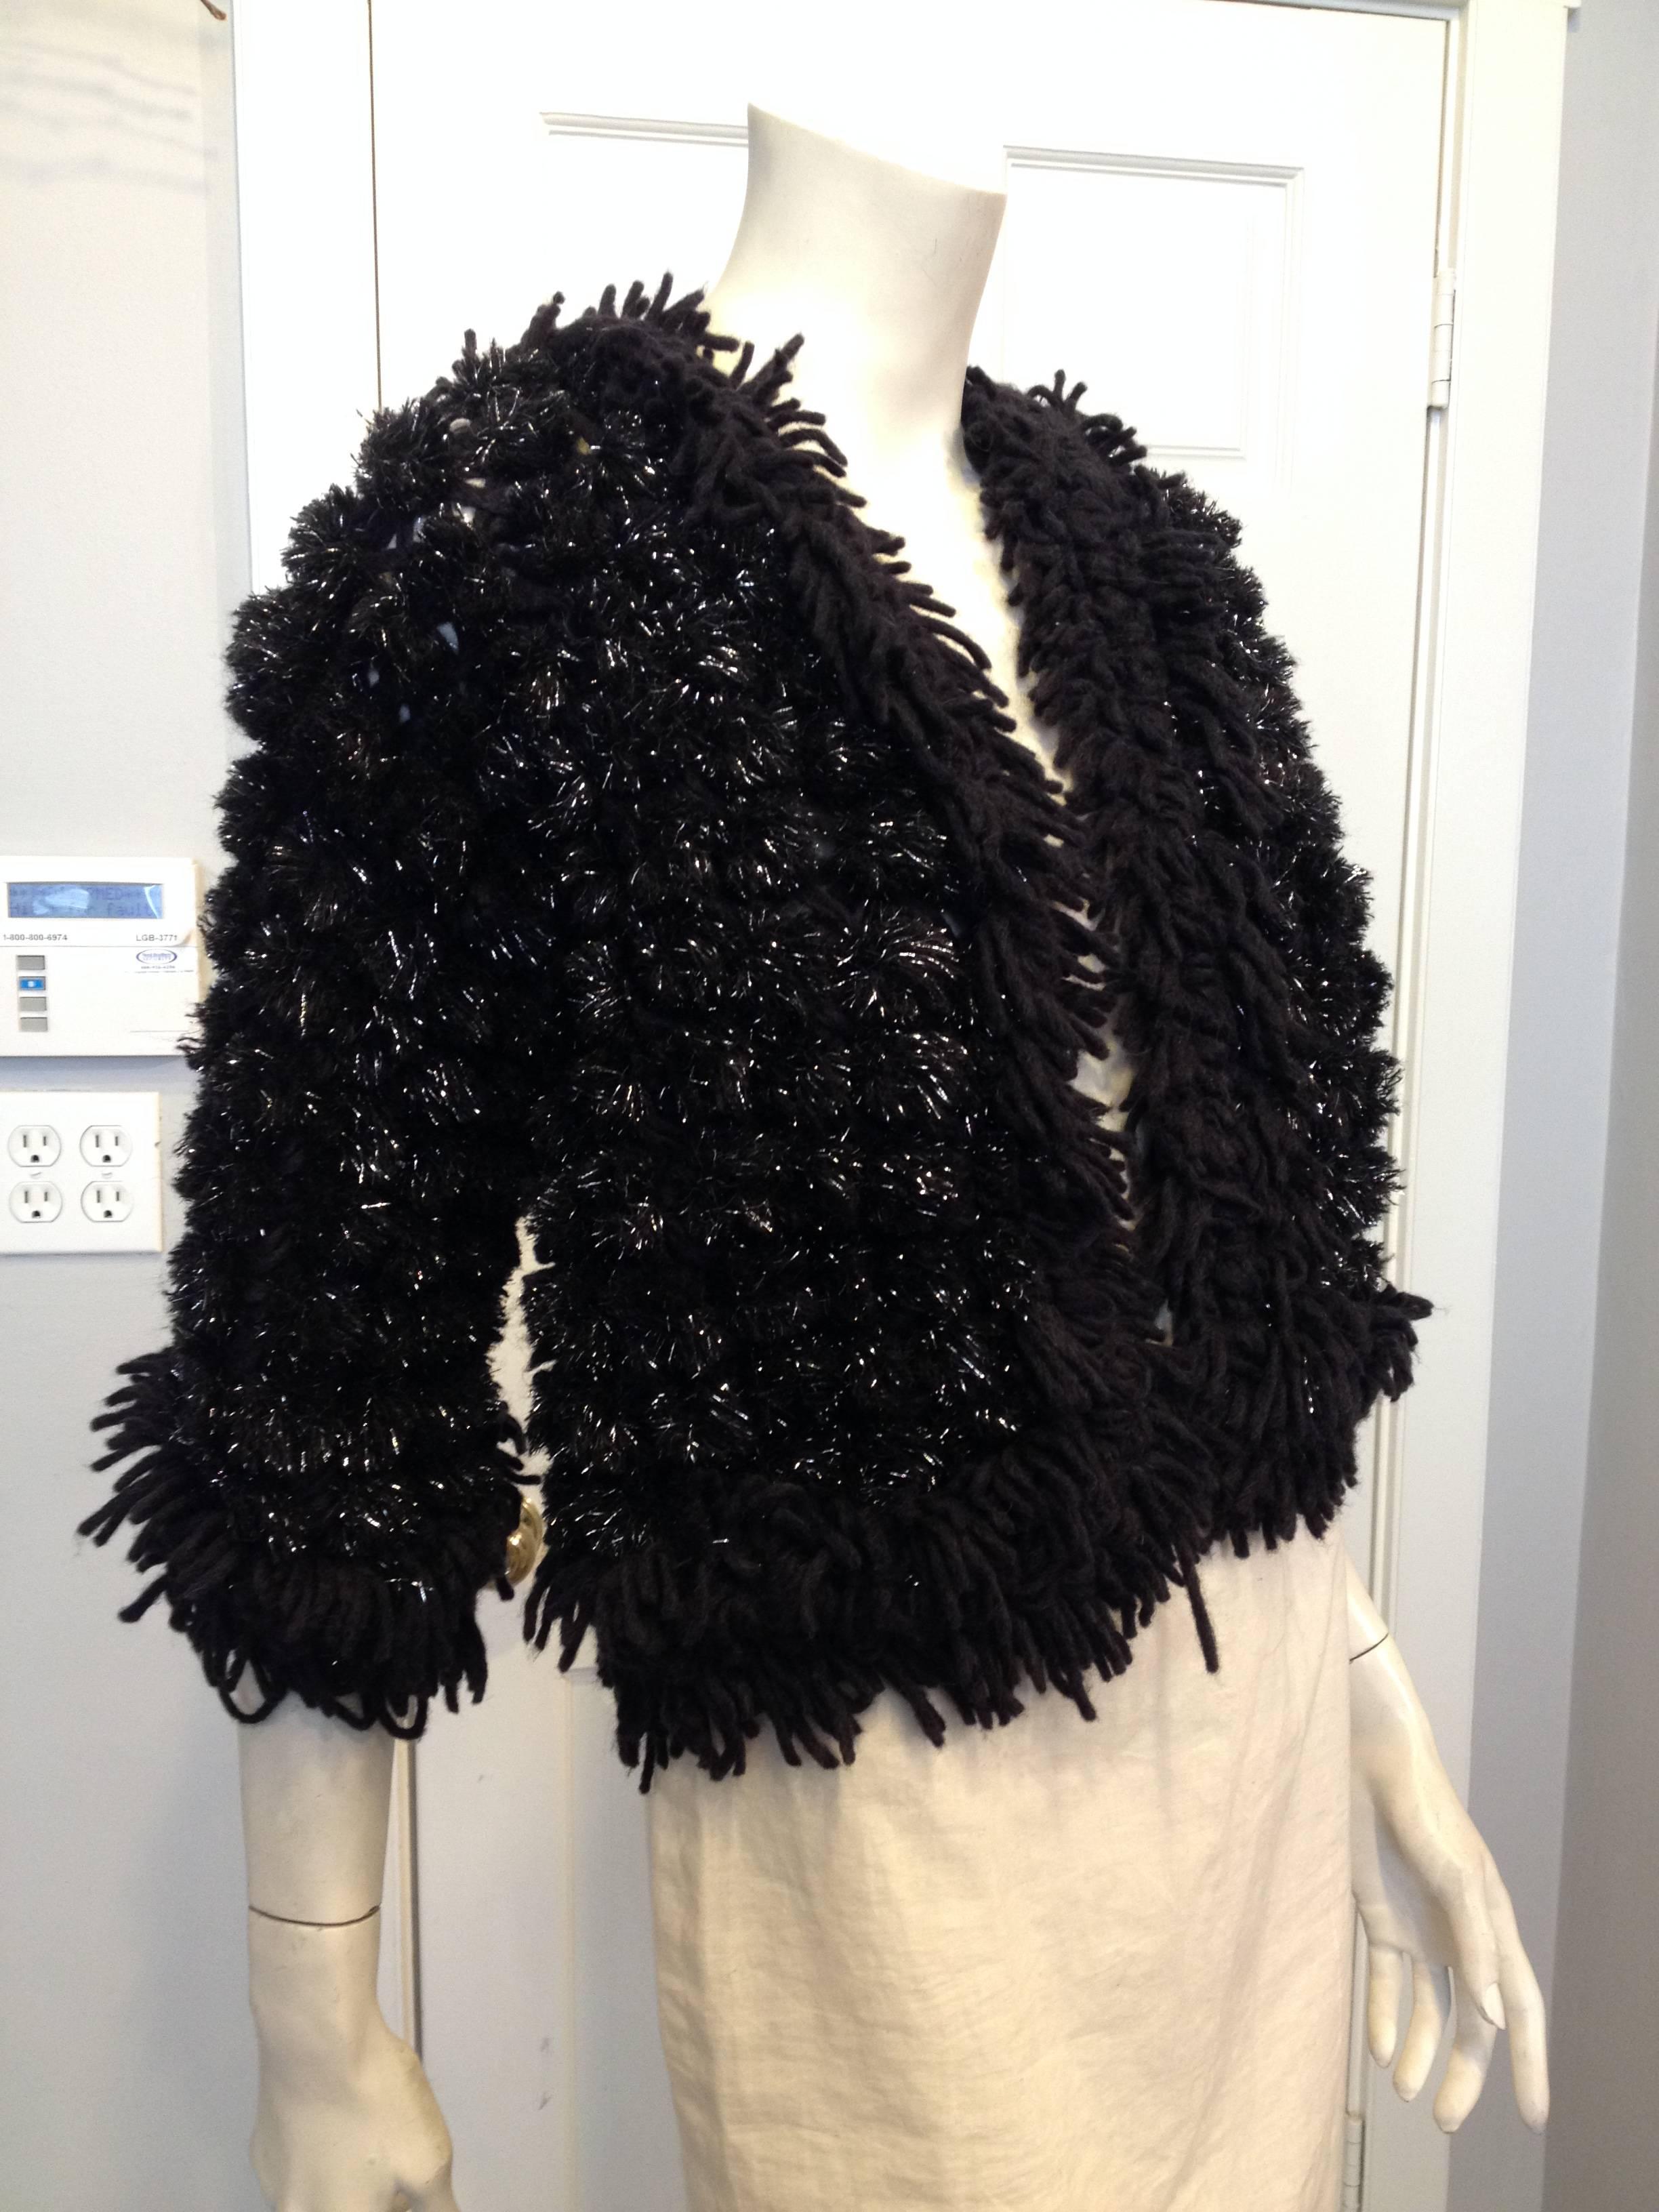 This piece is made entirely from black pom poms laced with sparkling lurex threads, all strung together on a backing web of black yarn. It's cut loose with an open front, fabulous but perfectly casual at the same time - pin the front closed with an